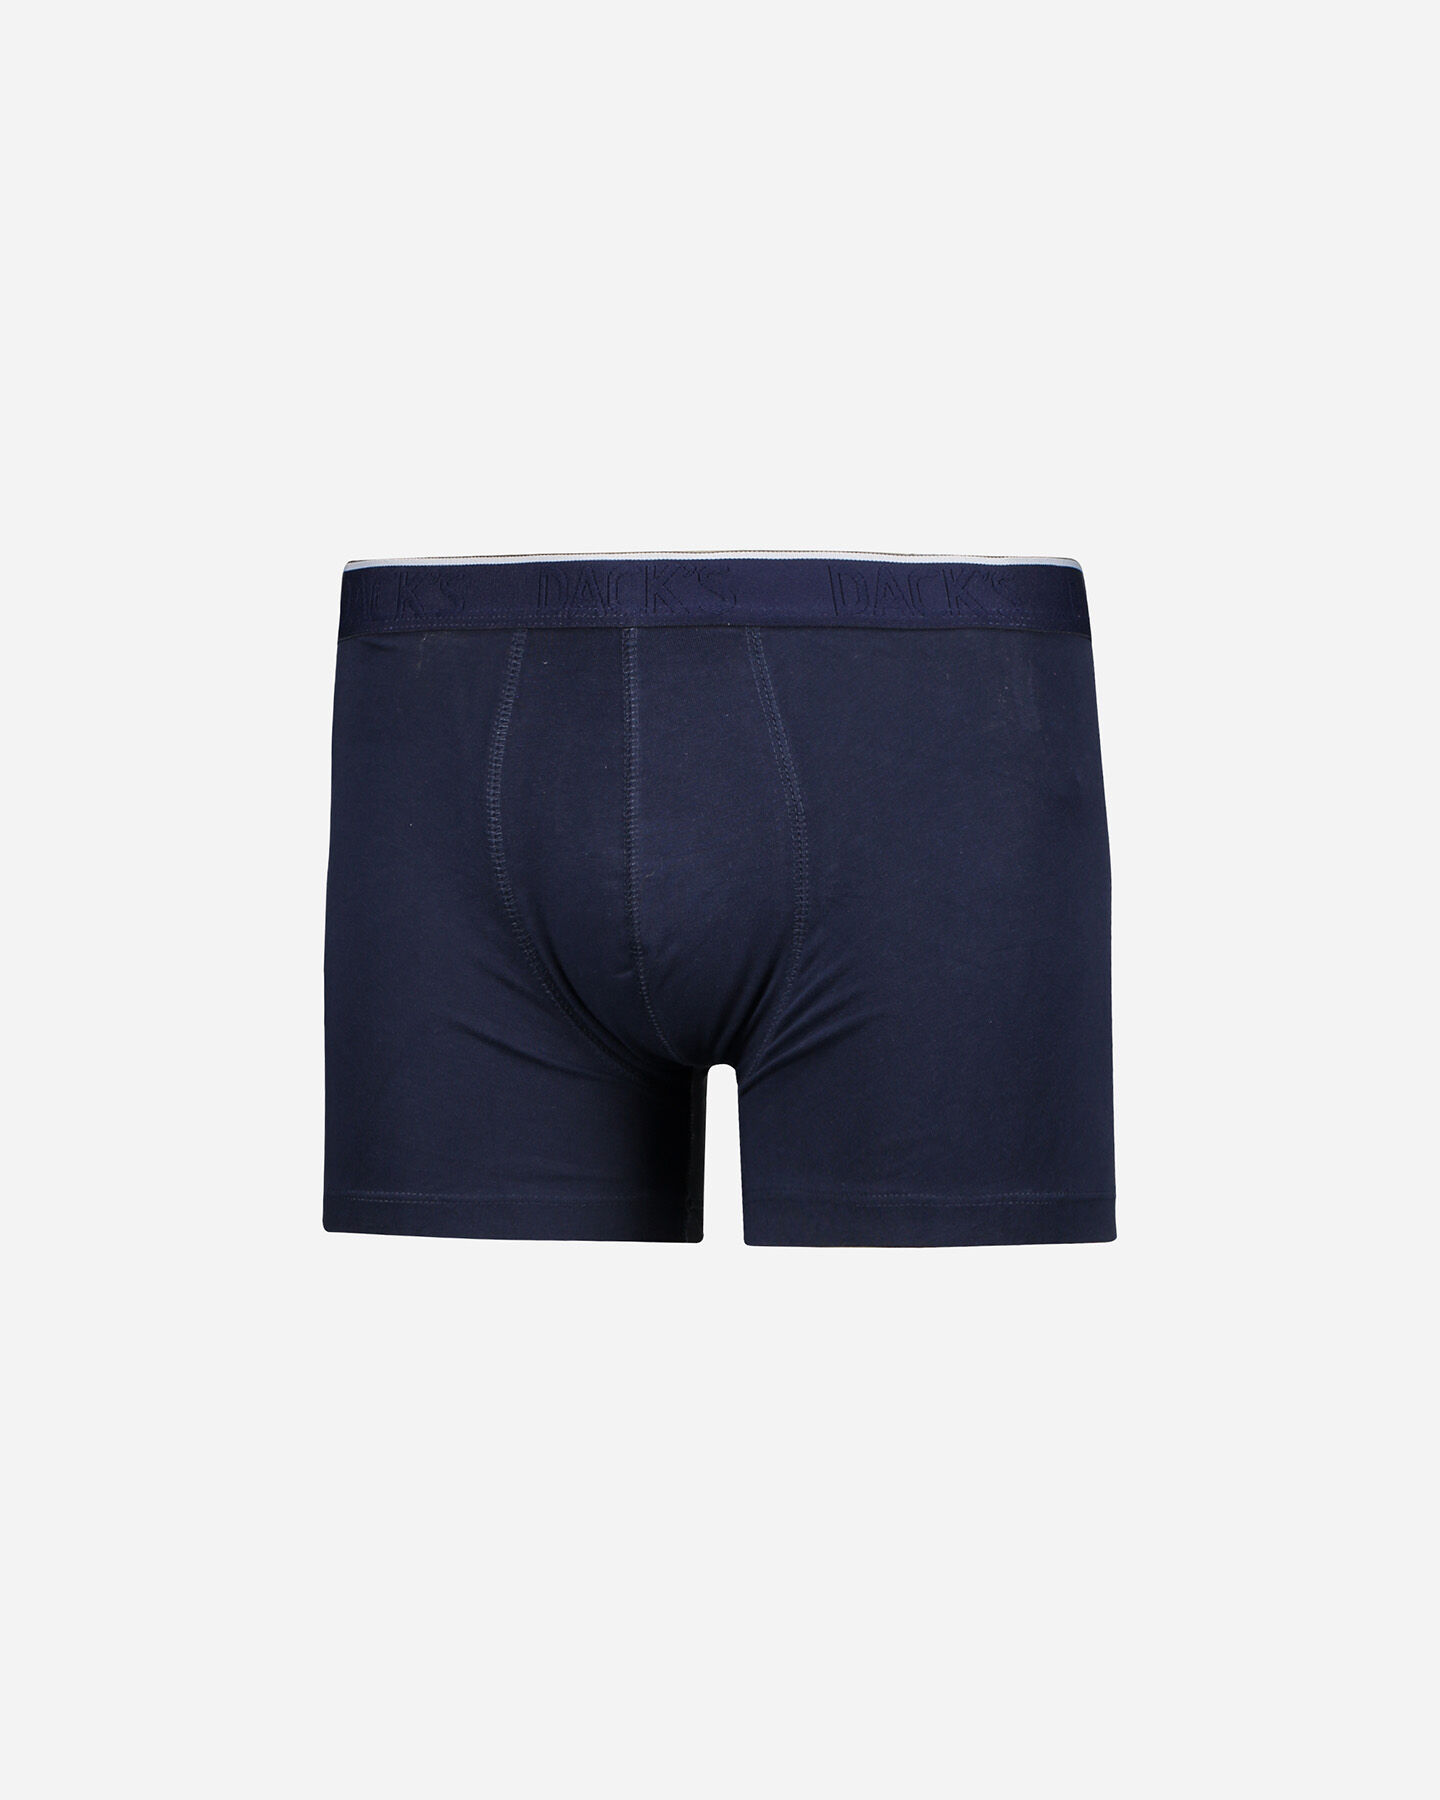  Intimo DACK'S BIPACK BASIC BOXER M S4061965|519/GM01|S scatto 2